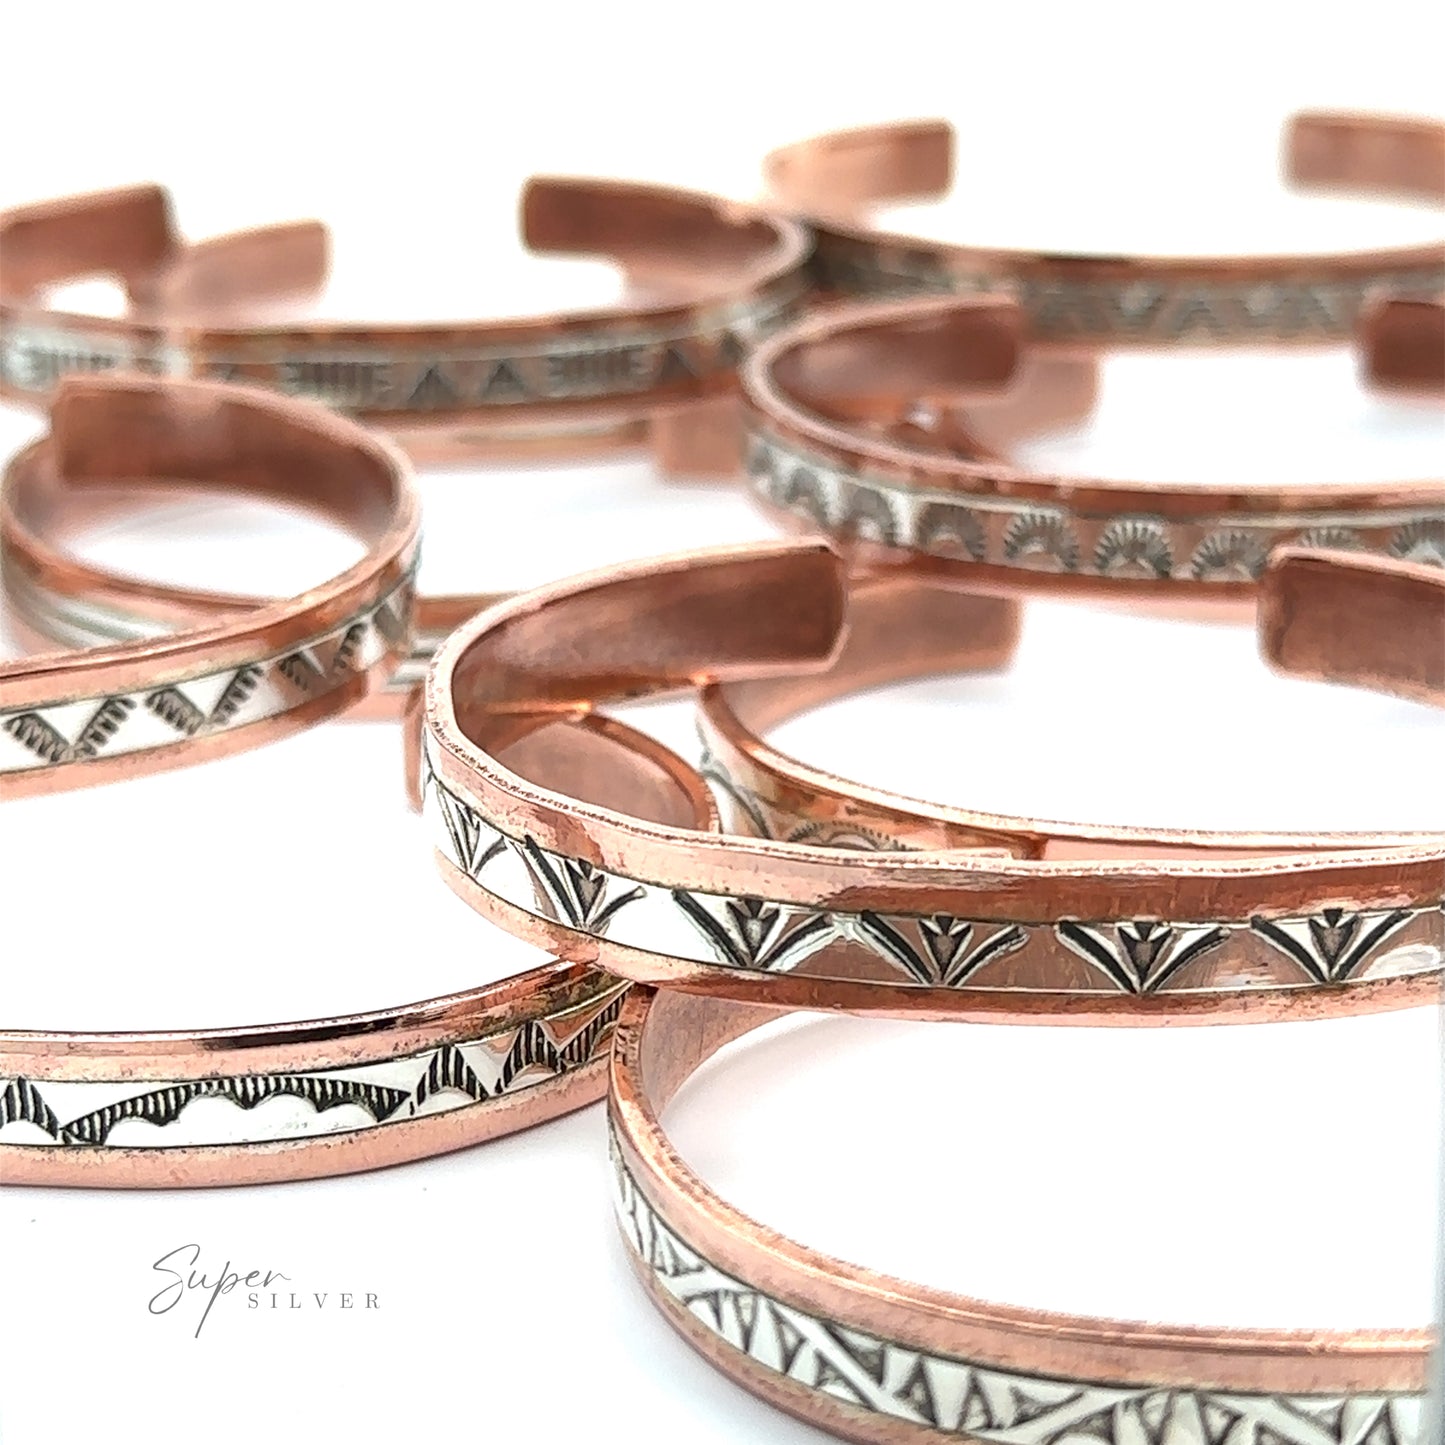 Native American Handmade Copper And Silver Bracelets, featuring etched black and white geometric designs, are arranged in a partially overlapping pattern on a white surface. Some of the pieces incorporate elements of Native American handcrafted artistry.